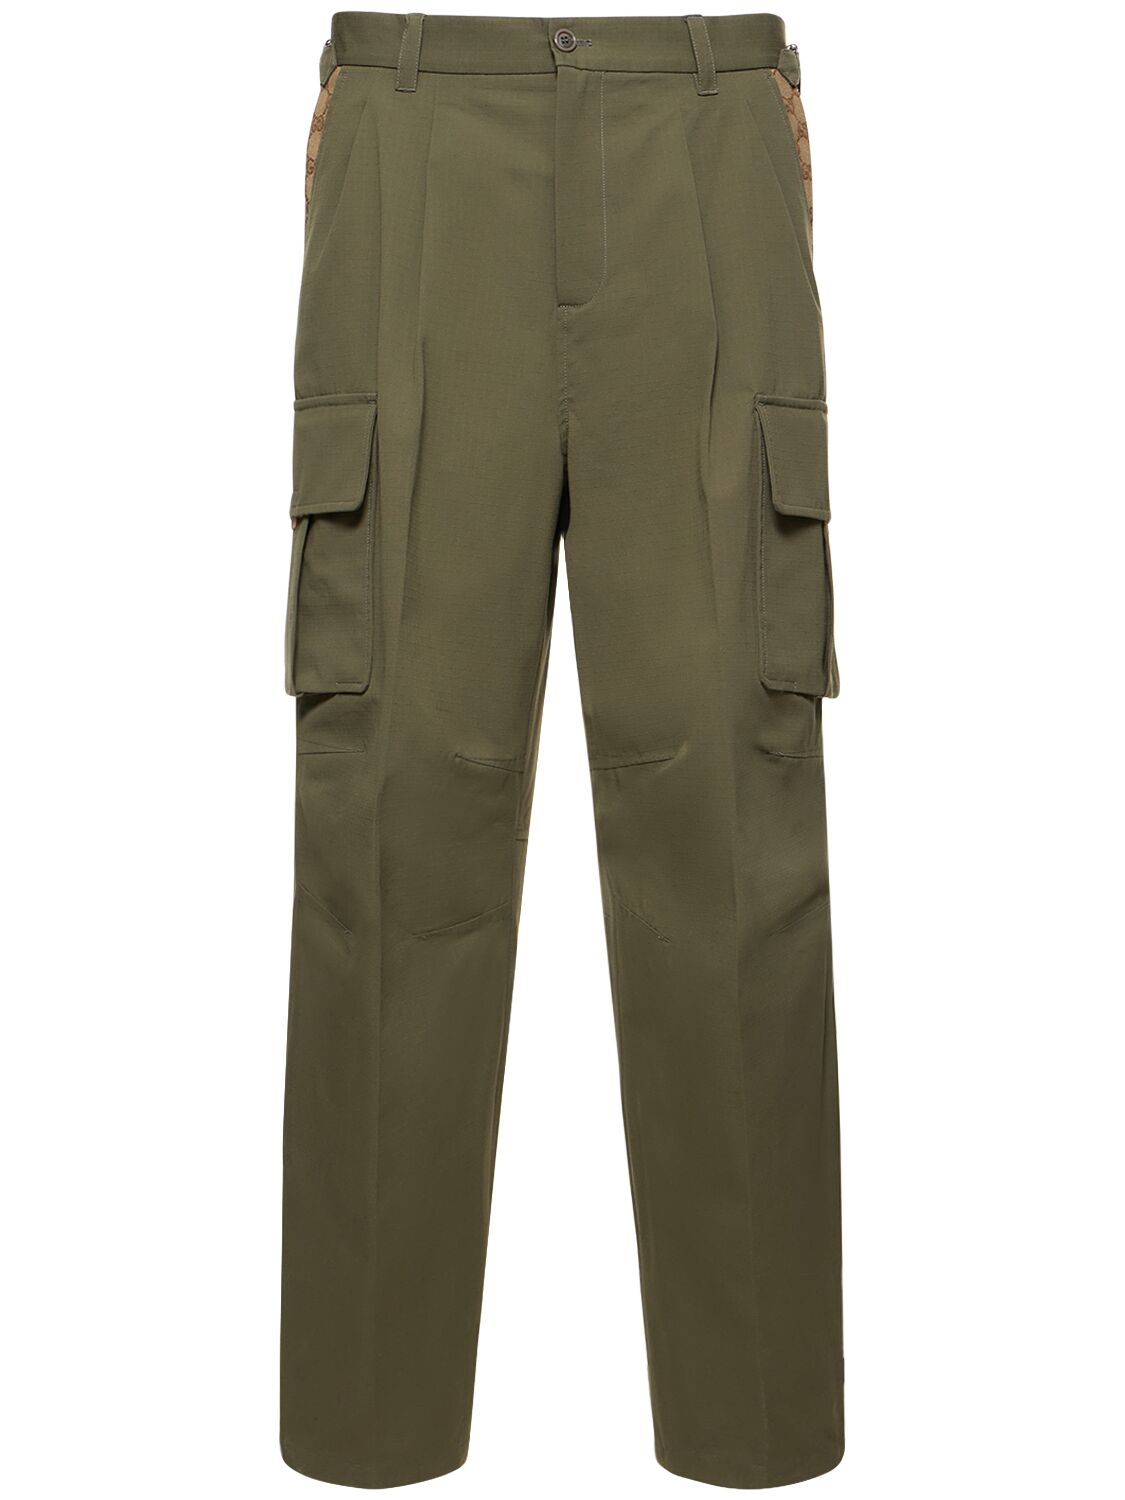 Combat Trouser Cargo US Army Military Style BDU Ripstop Pant Olive